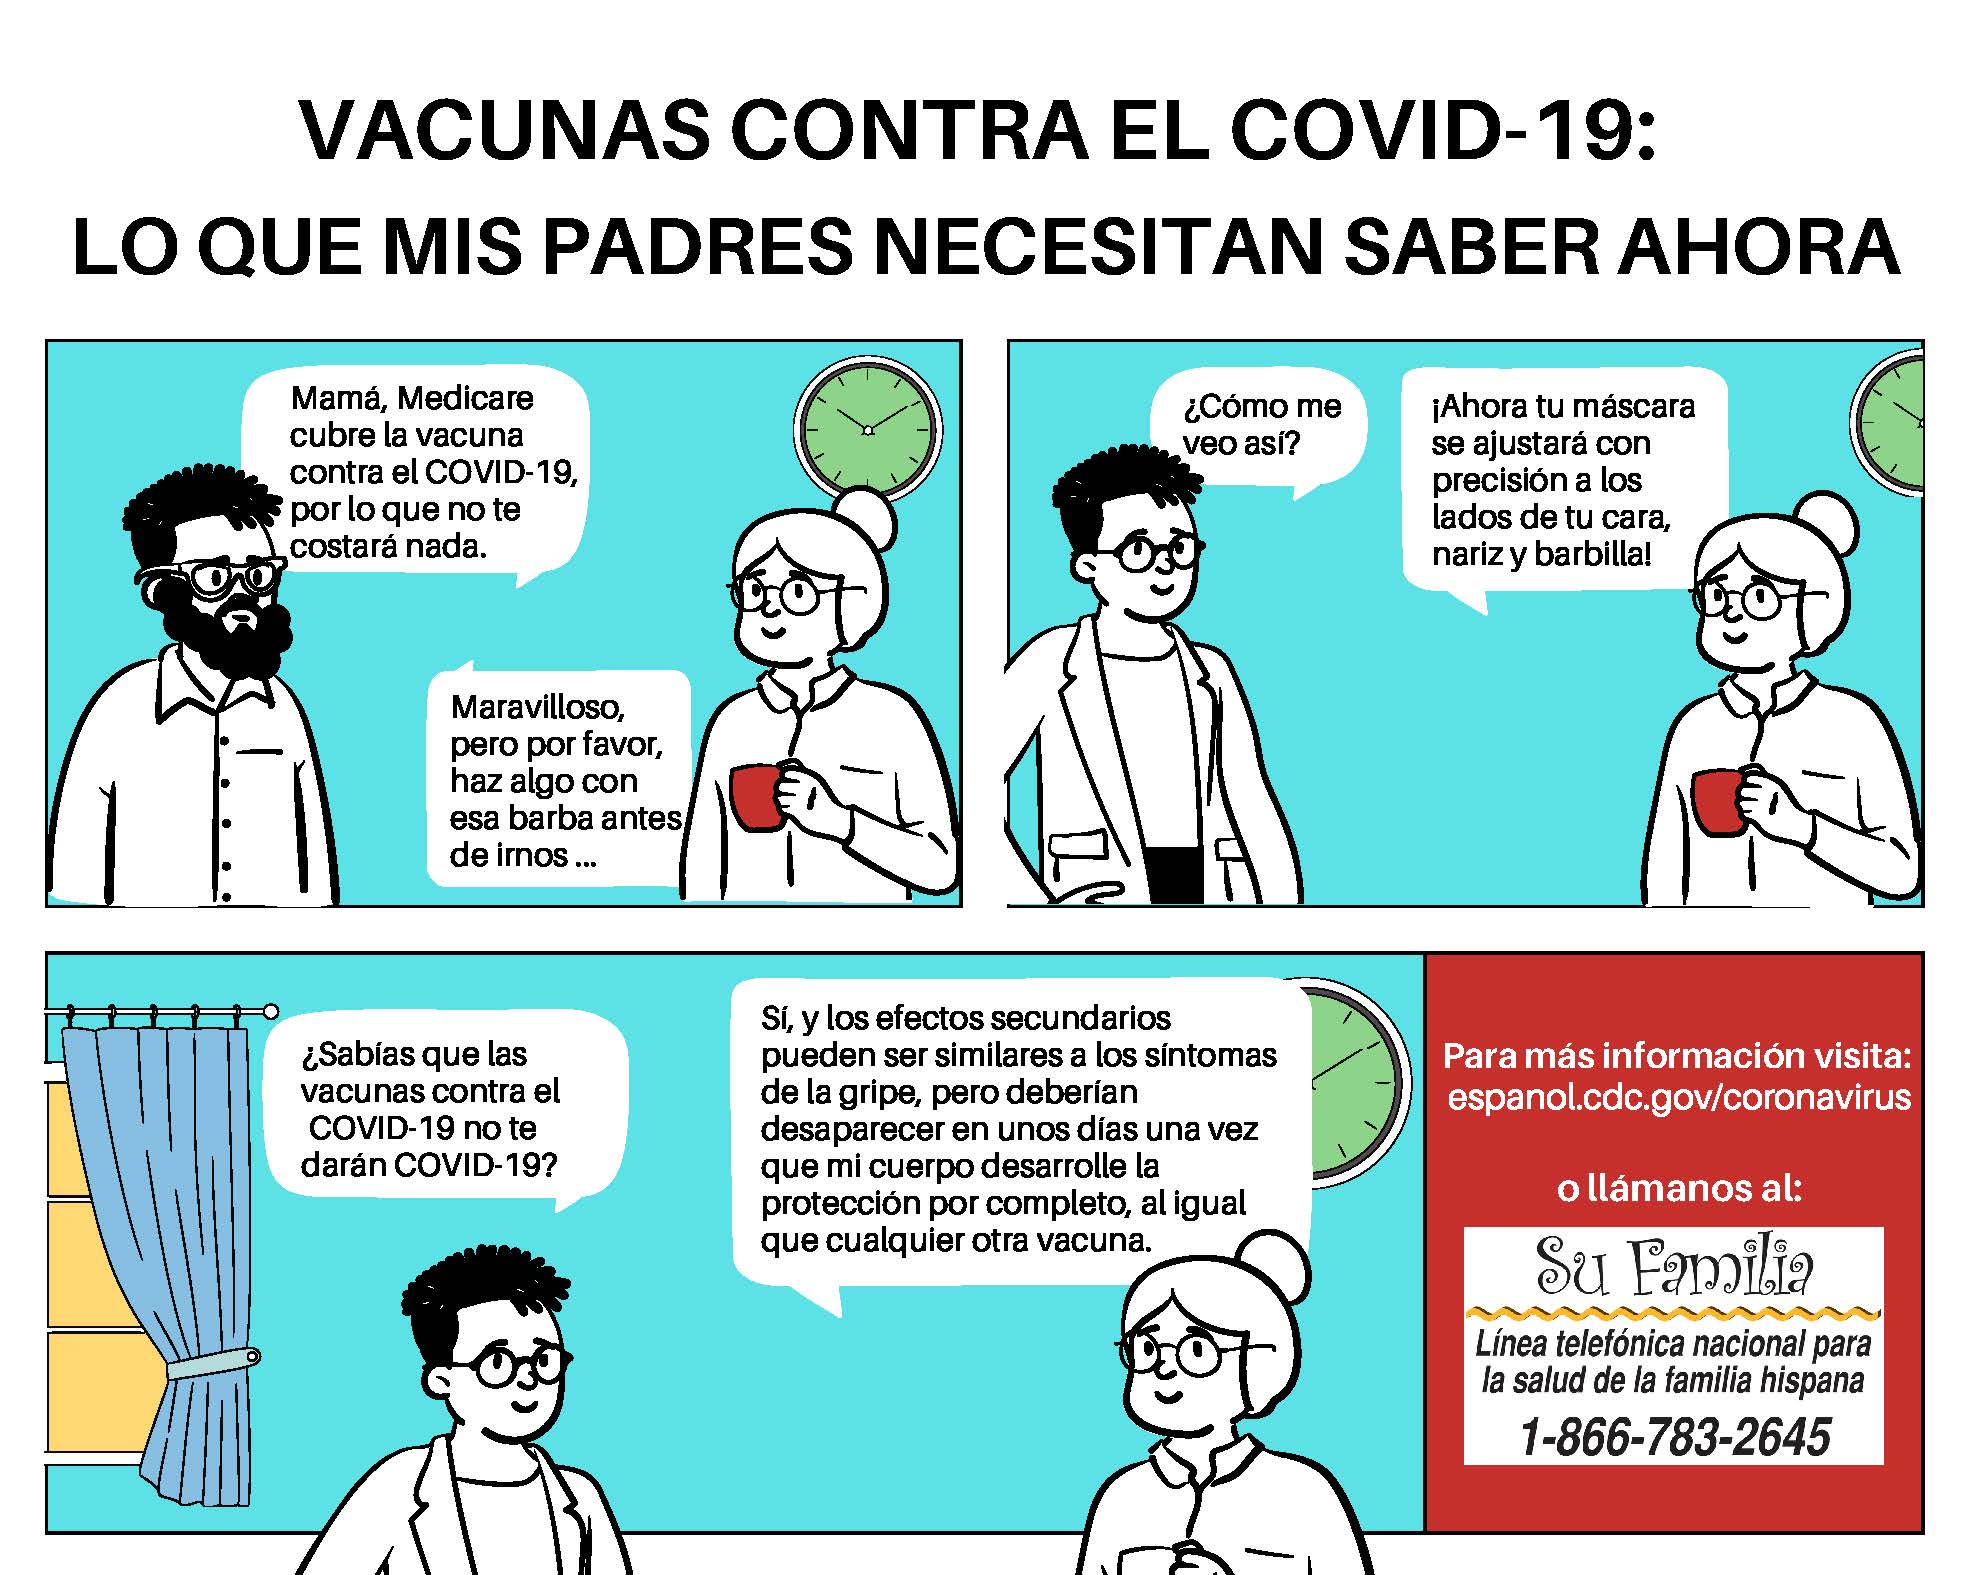 what my parents should know about COVID-19 vaccines - Latinos - Spanish via National Alliance for Hispanic Health